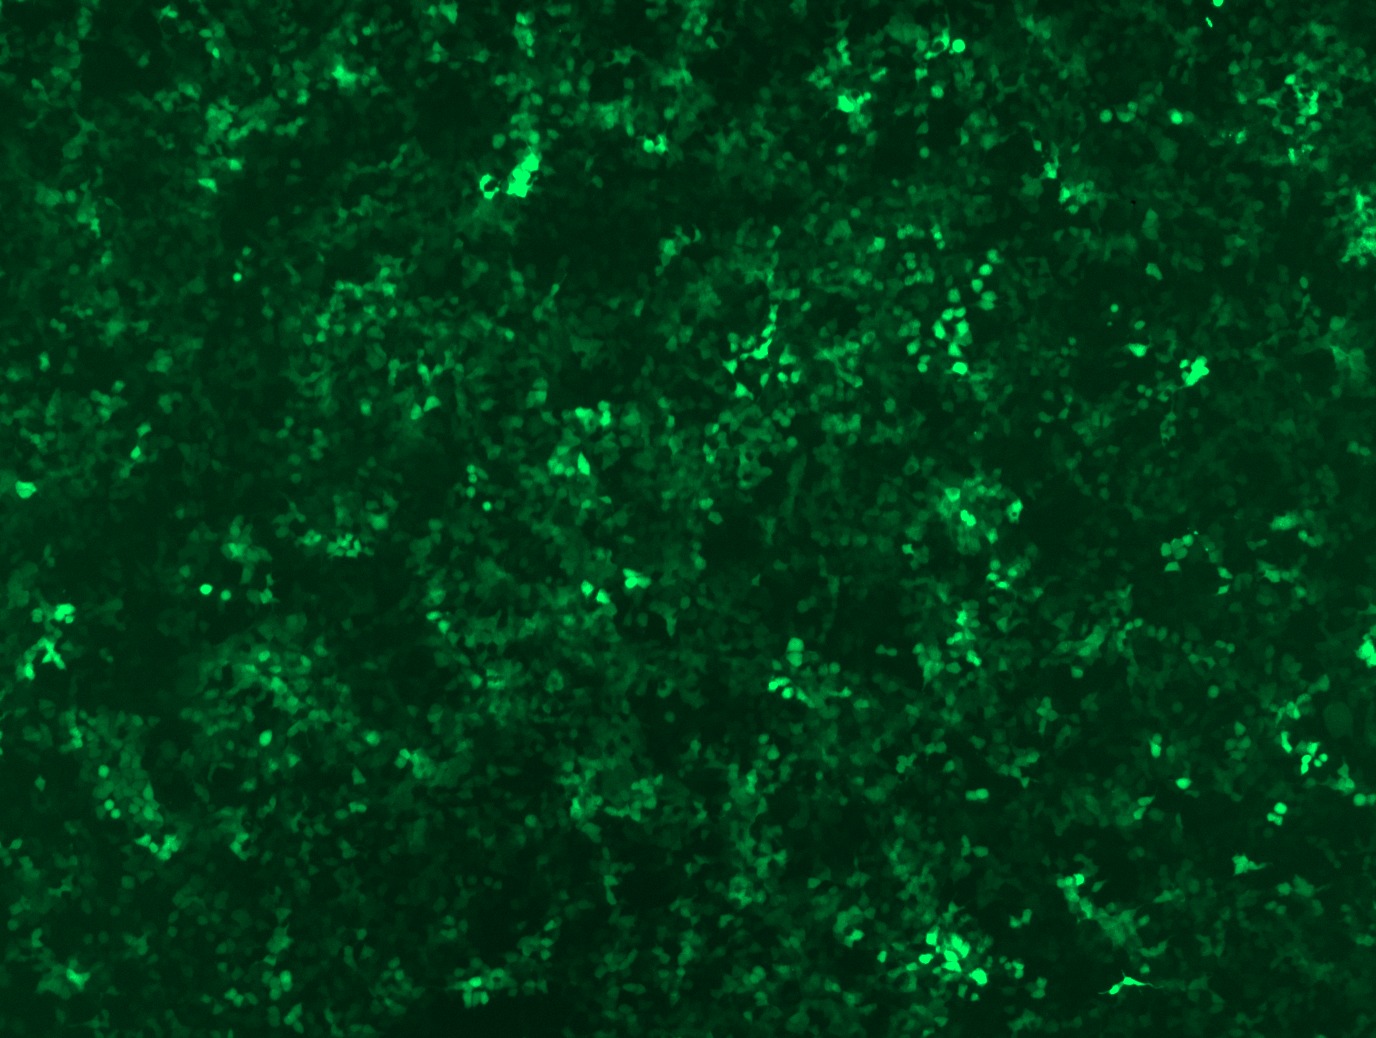 GFP signal was observed under microscope at 48 hours after transduction of TL503183A virus into HEK293 cells. TL503183A virus was prepared using lenti-shRNA TL503183A and TR30037 packaging kit.